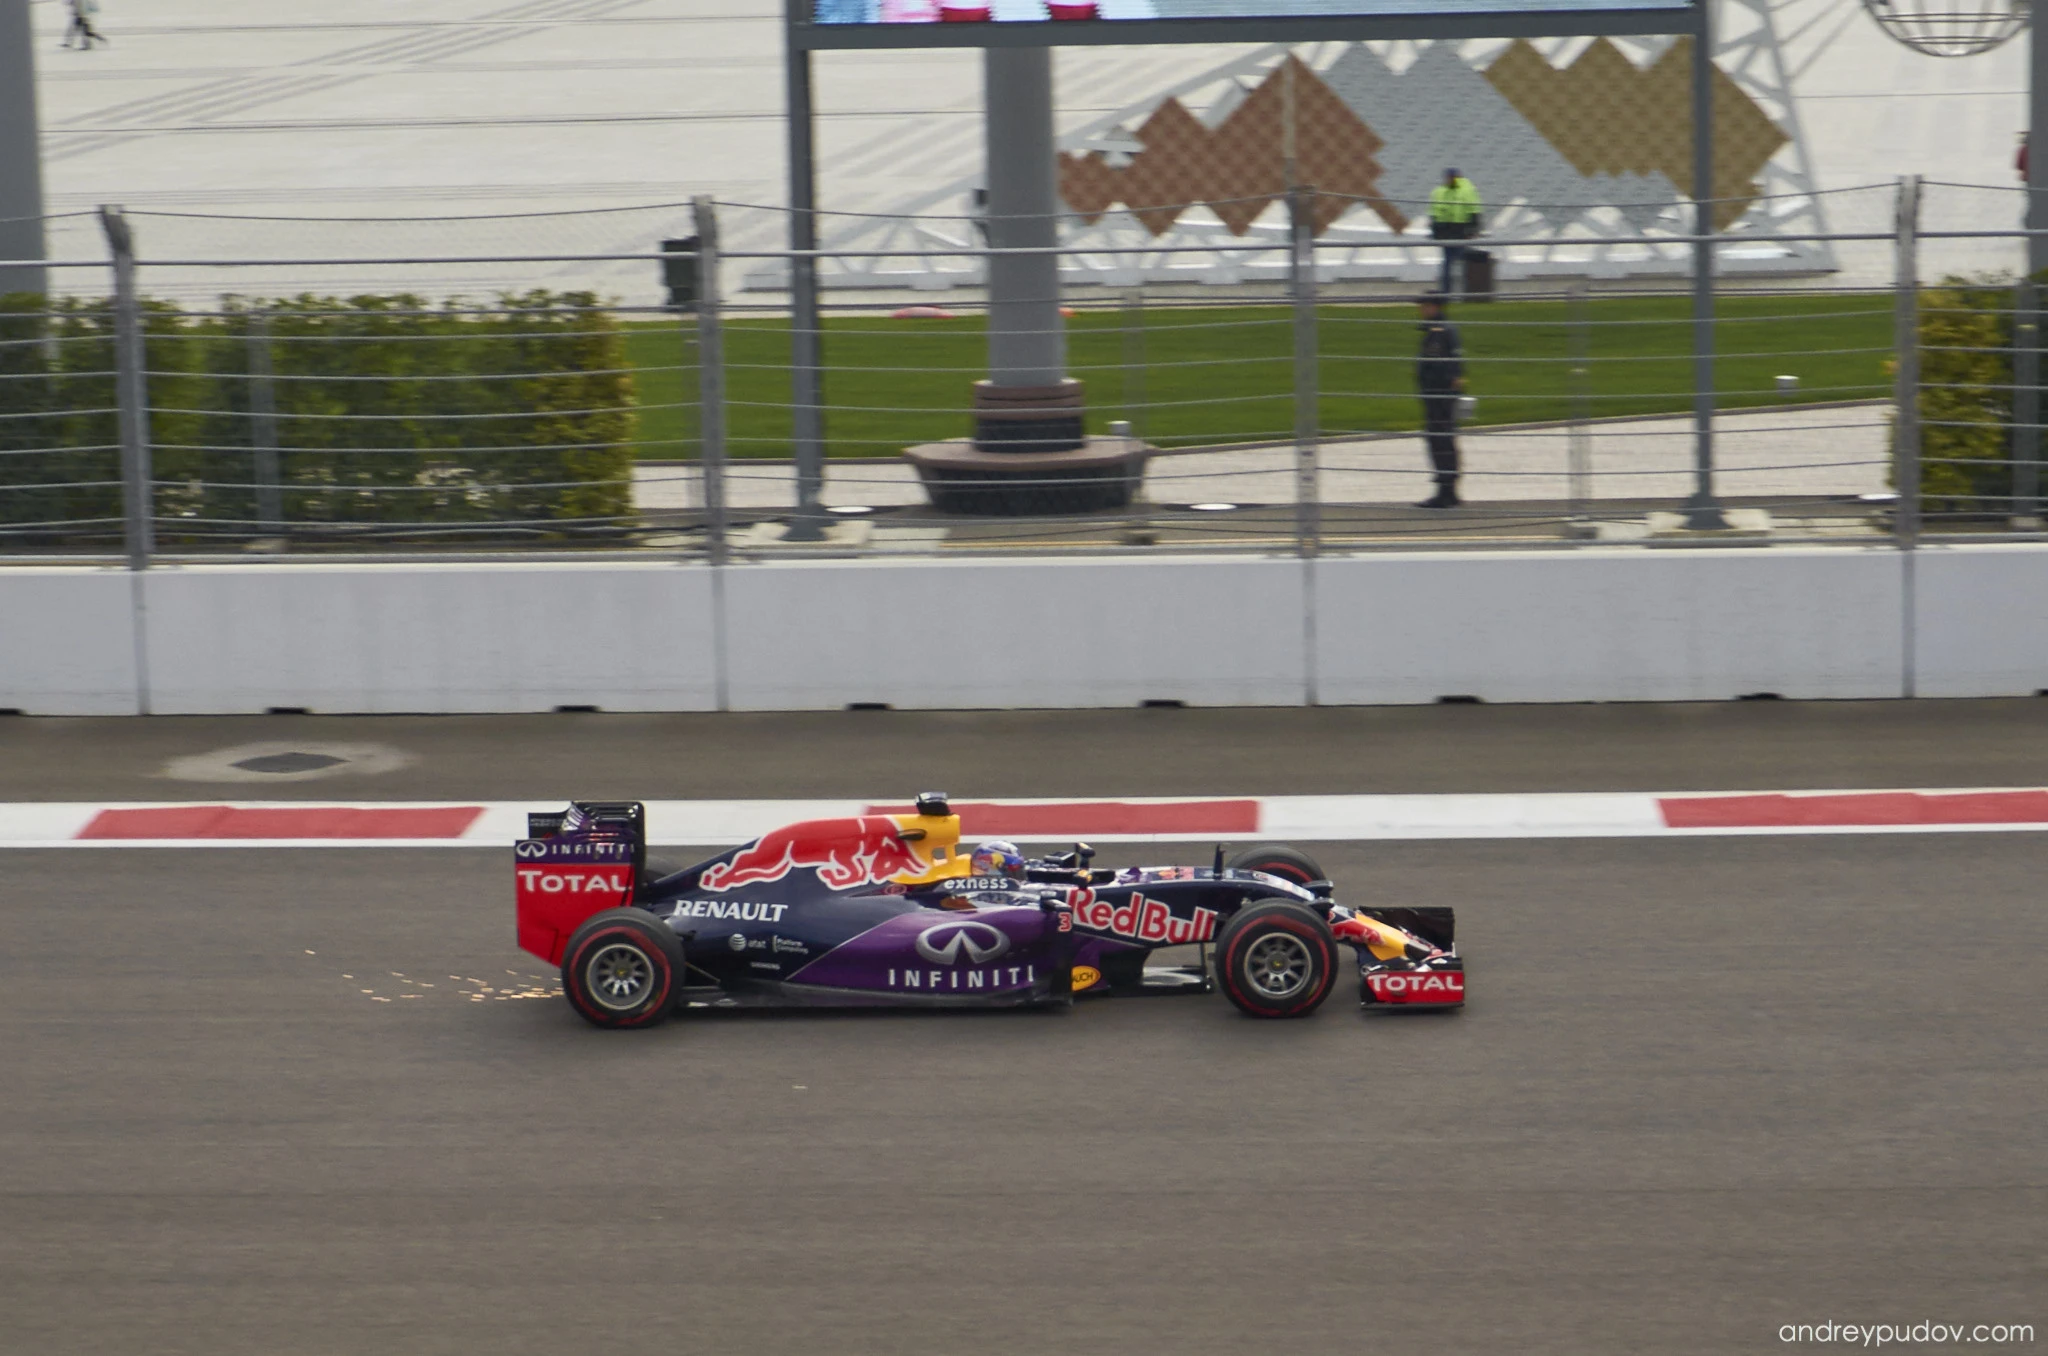 Daniil Kvyat drives Red Bull RB11

Daniil Kvyat is a Russian racing driver who competed in Formula One between 2014–2017 and 2019–2020, racing under the Russian flag. He became the second Formula One driver from Russia and is the most successful of the four Russian drivers to date, with three podiums.